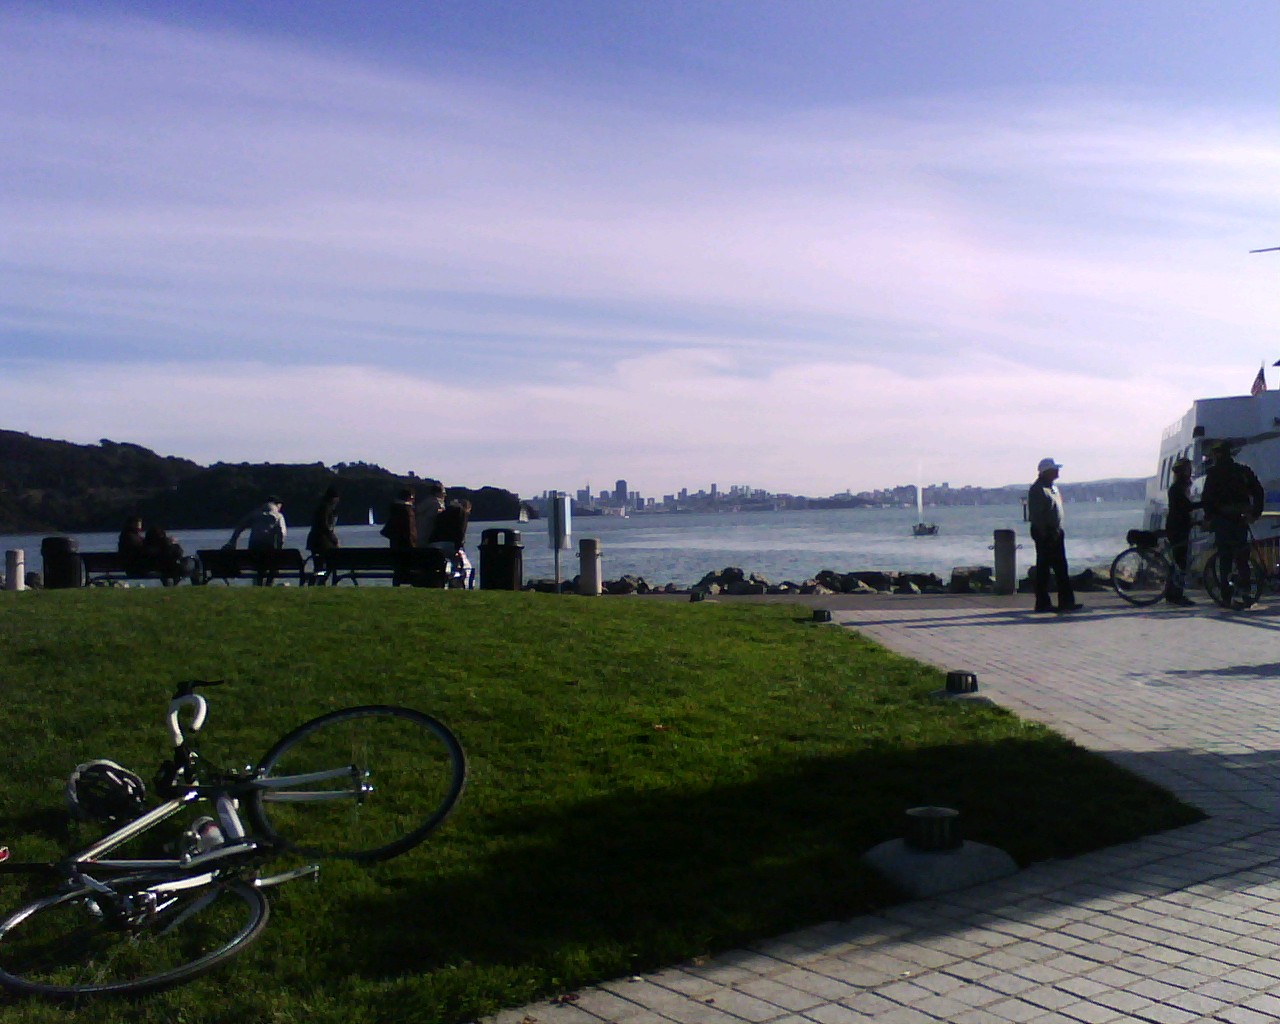 The view of San Francisco from Tiburon